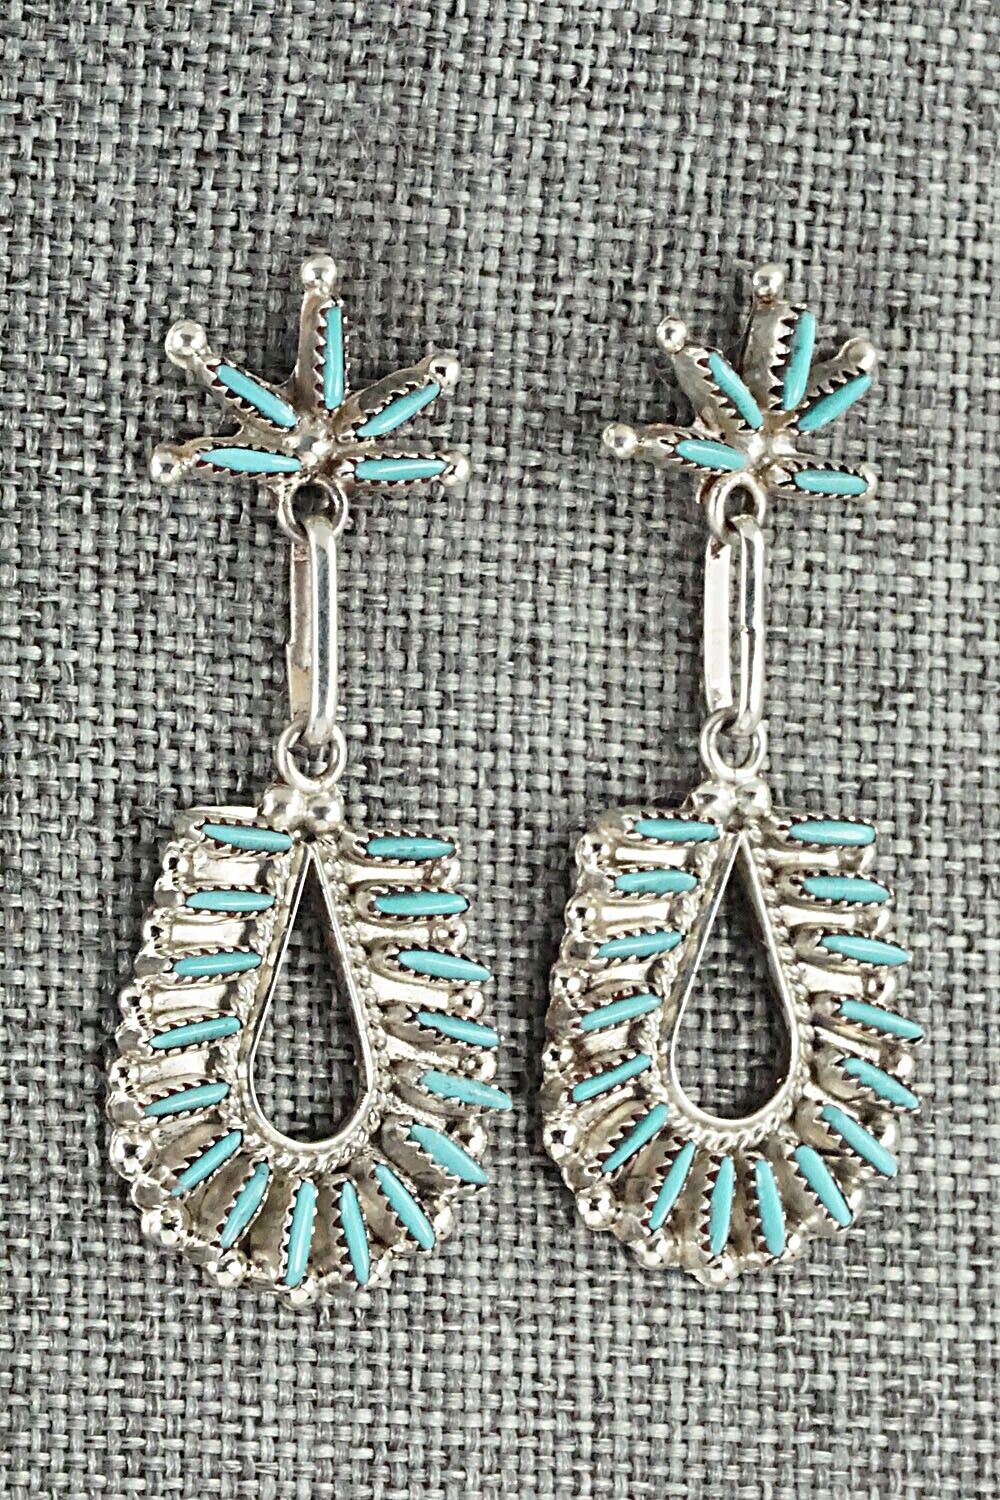 Turquoise & Sterling Silver Earrings - Rena Cachina